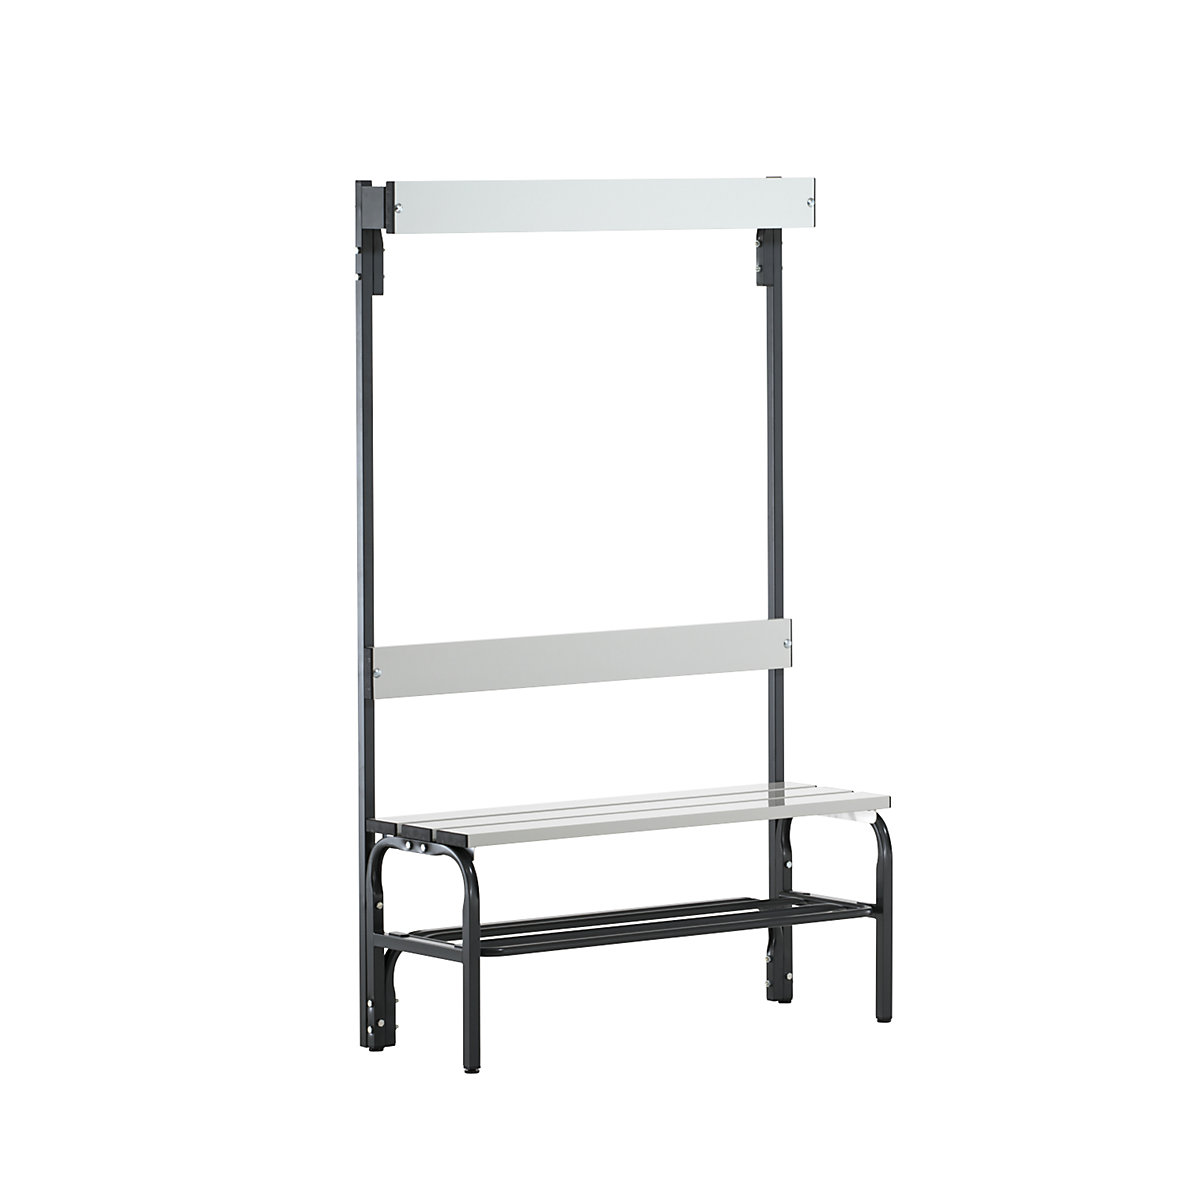 Changing room bench made of stainless steel – Sypro, HxD 1650 x 375 mm, length 1015 mm, 3 hooks, charcoal, shoe rack-2